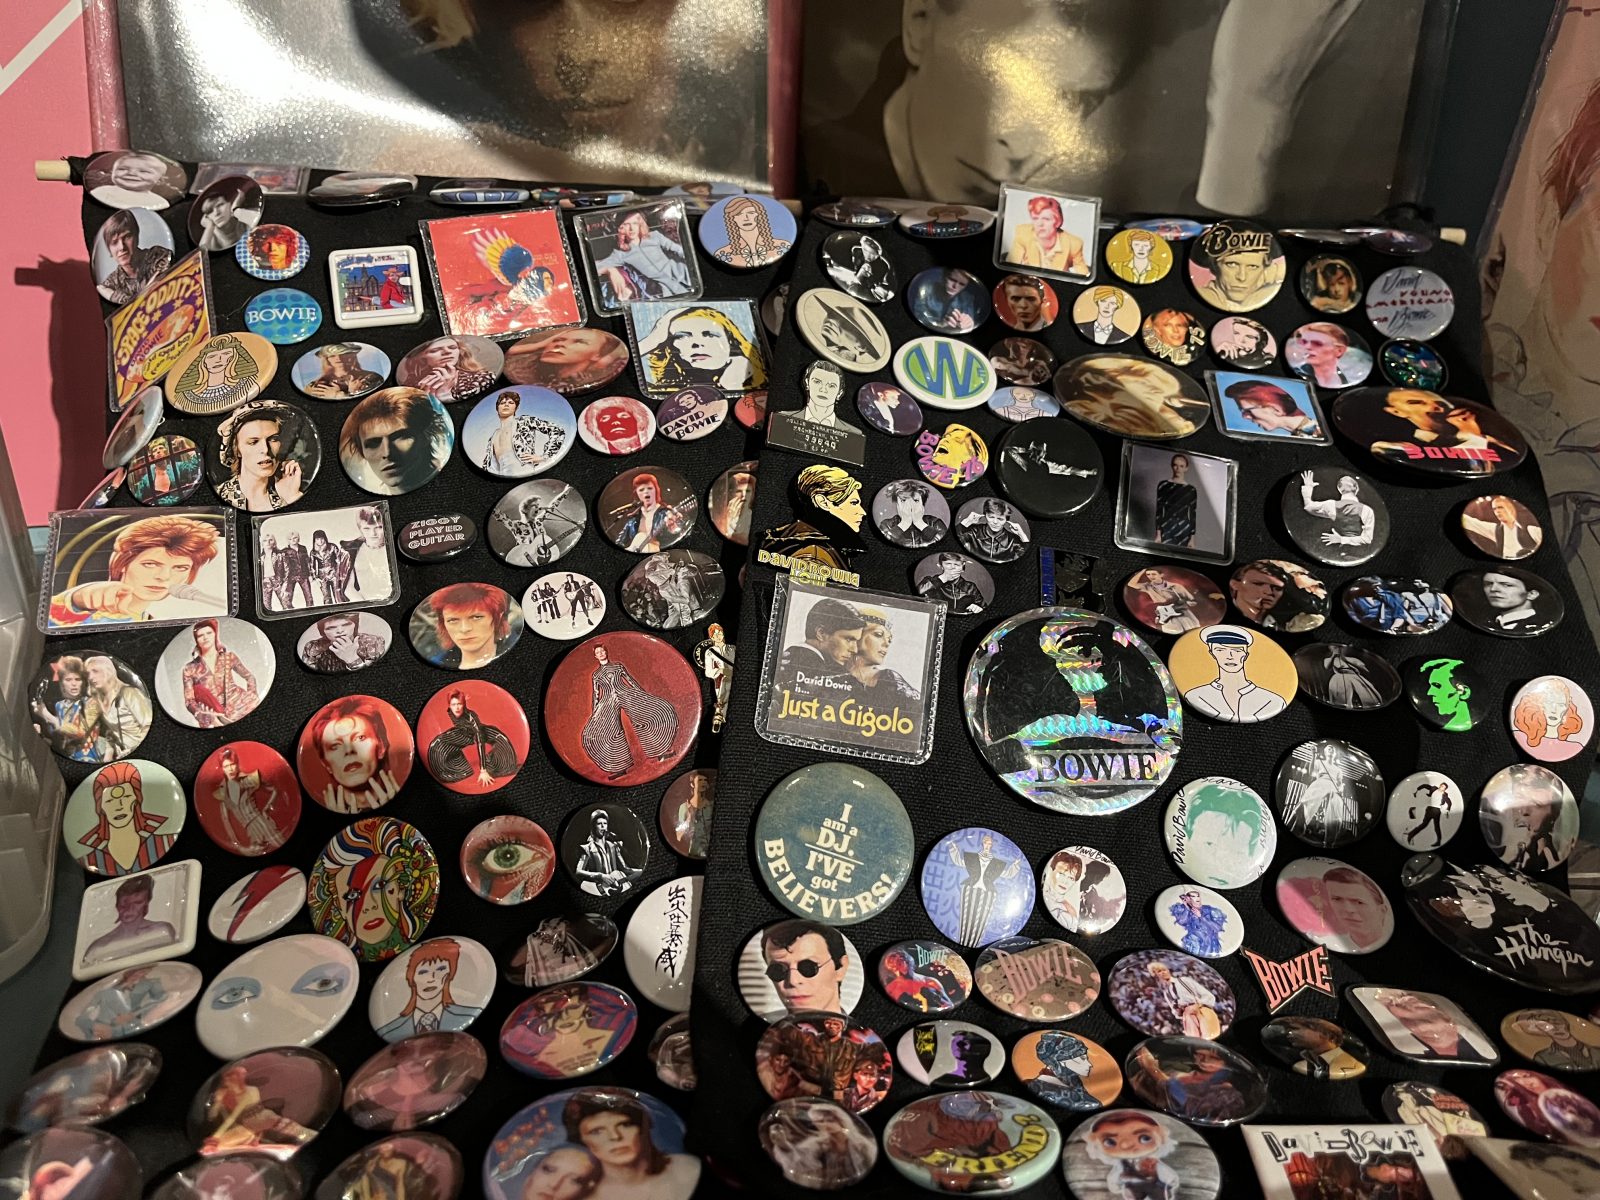 Pin badges from the David Bowie exhibition. 